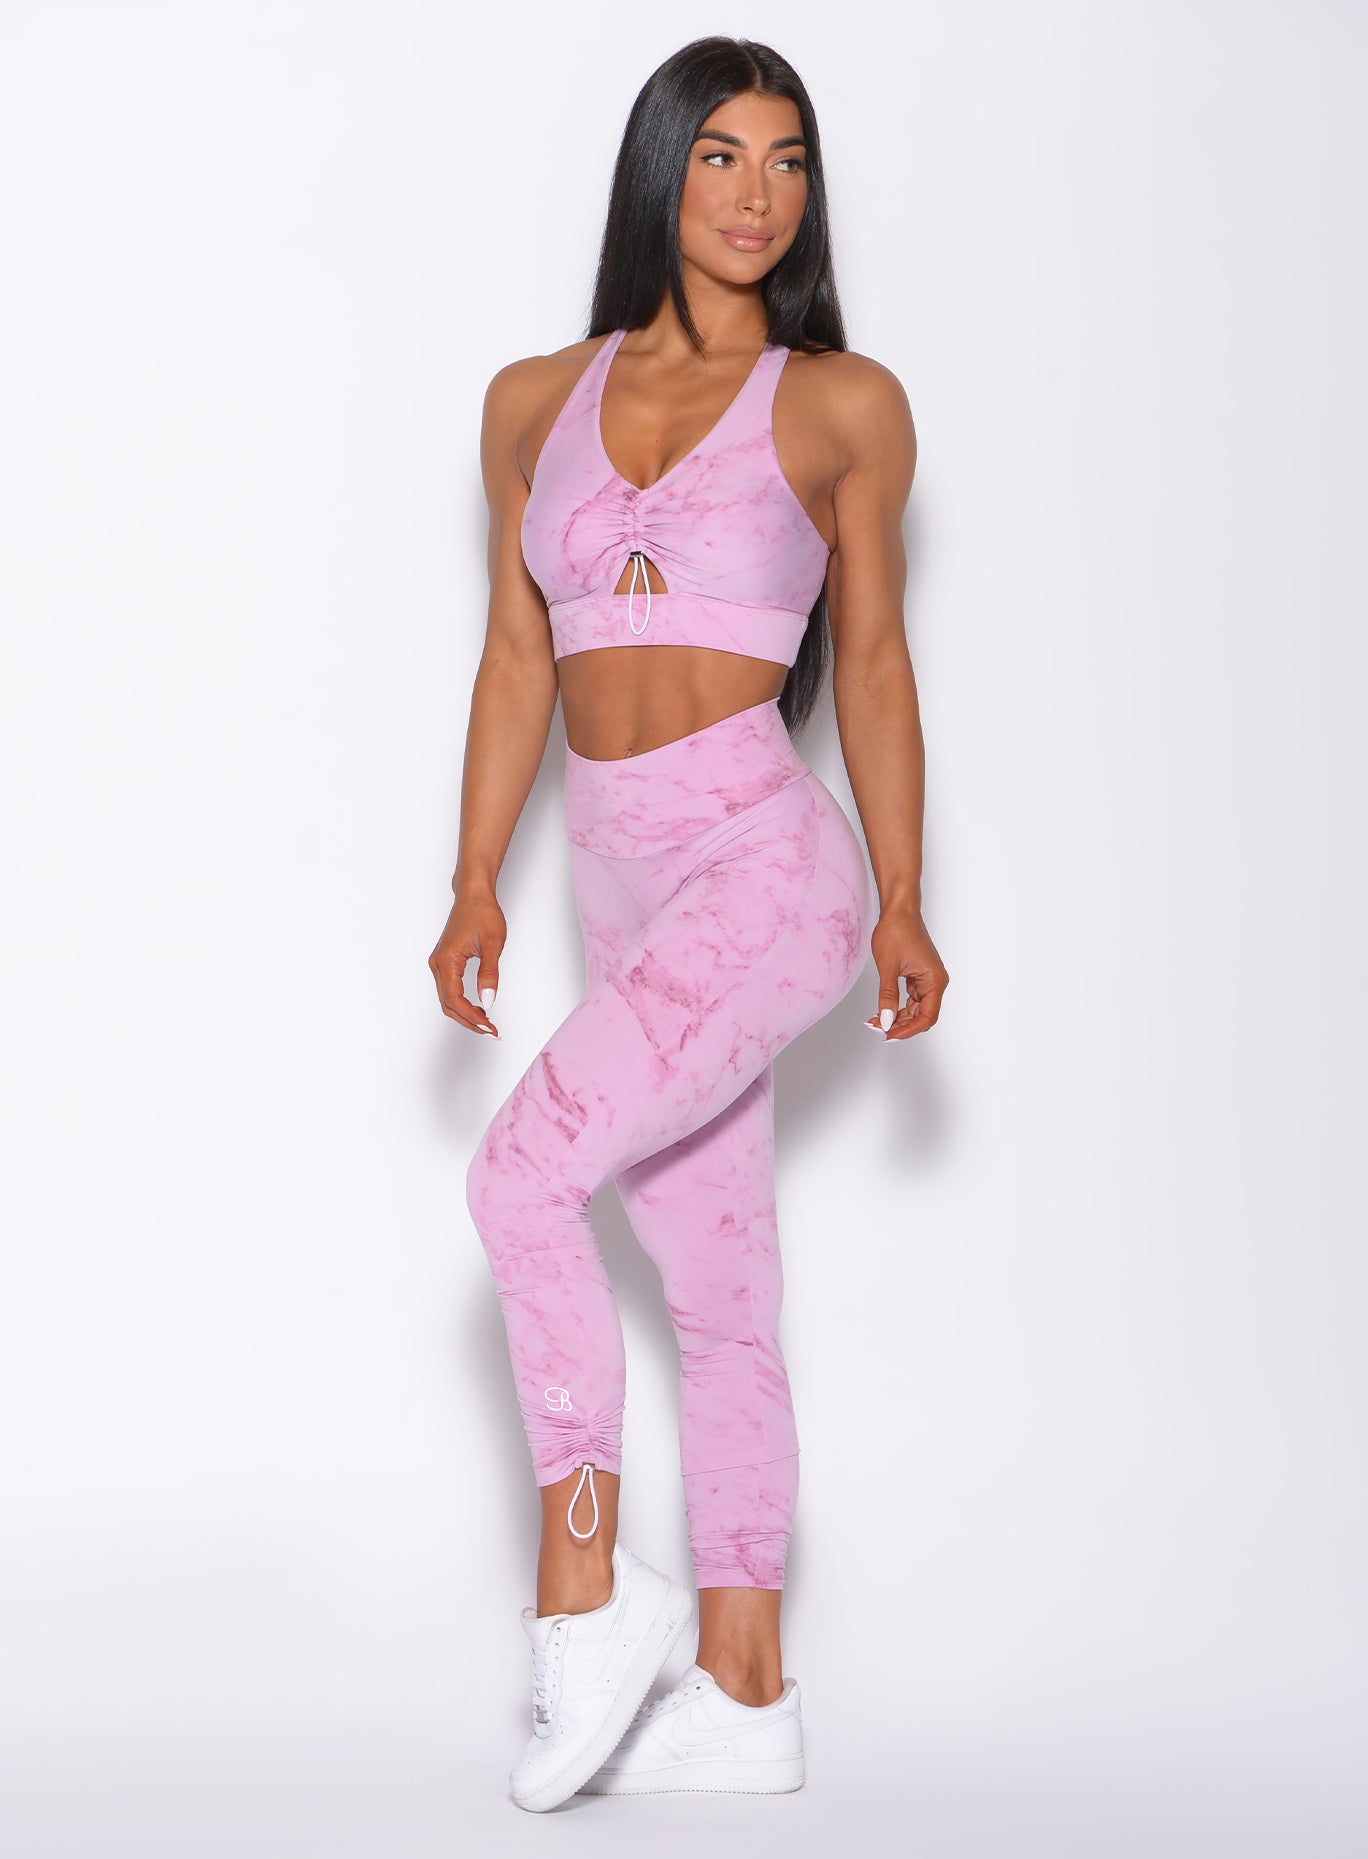 Left side profile view of a model angled to her left wearing our adjustable leggings in marble pink color and a matching bra